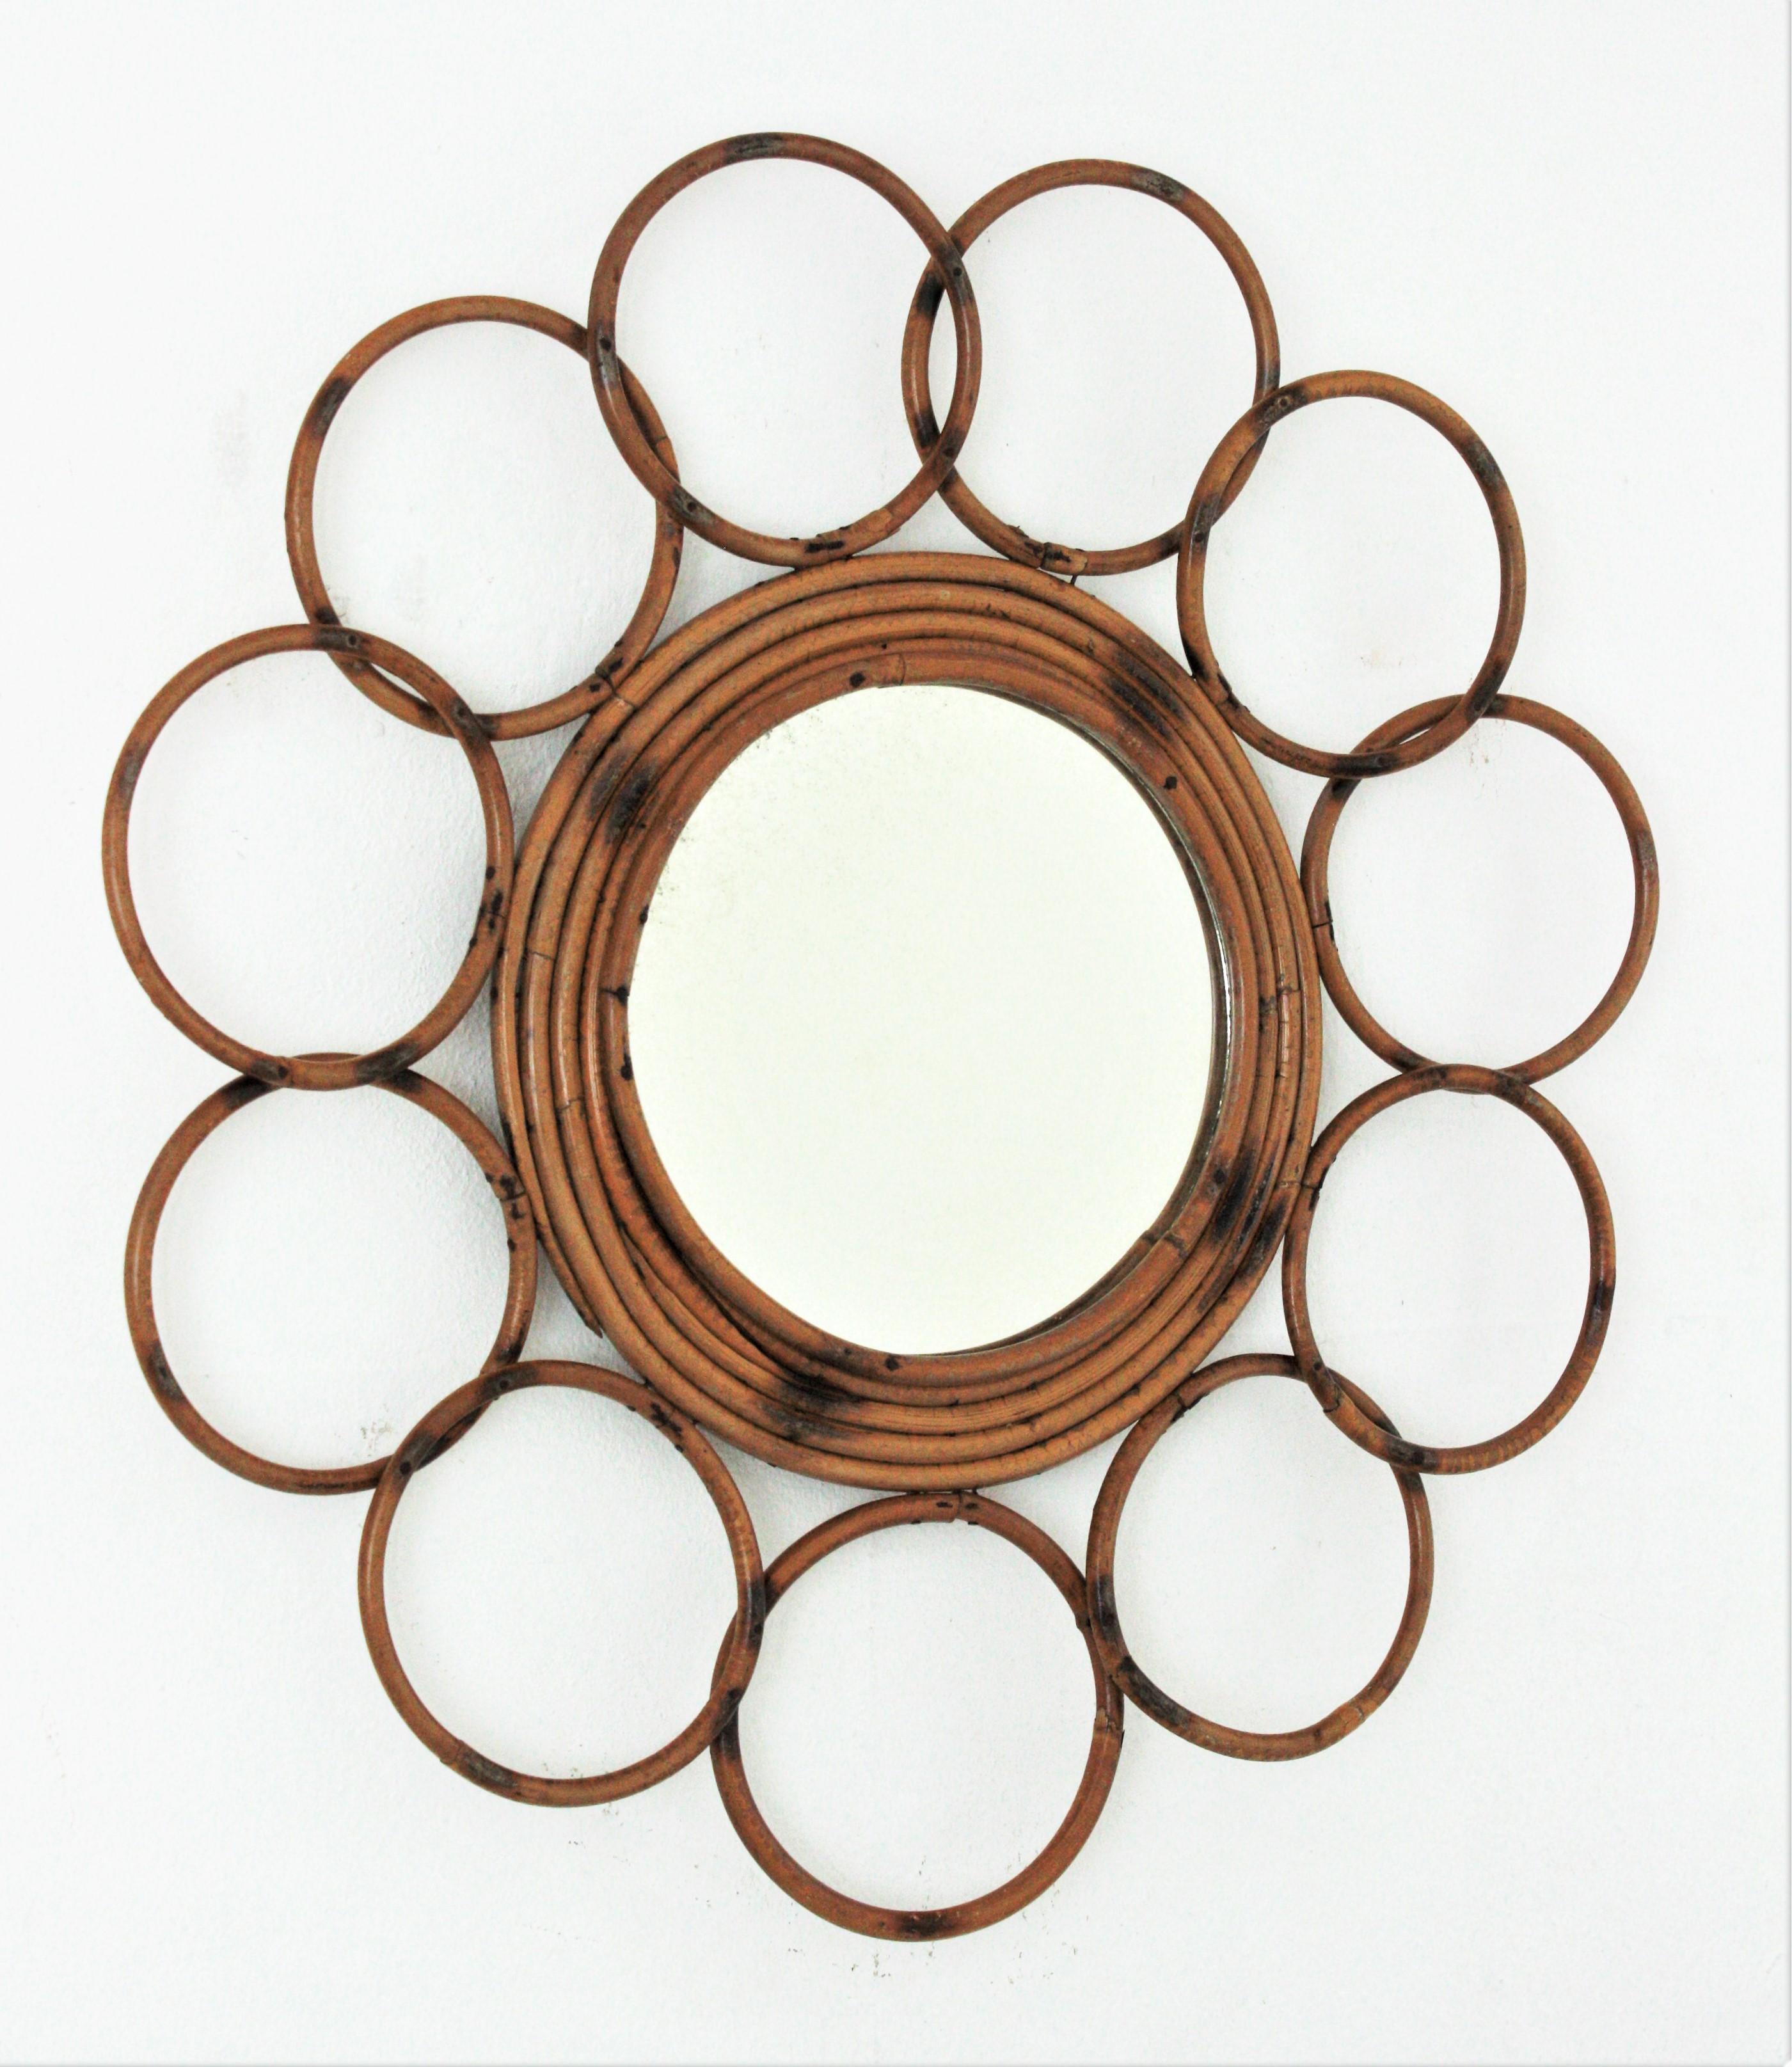 Rattan Round Flower Mirror, France, 1960s
This handcrafted mirror is framed with circles and it has pyrography decorations on the frame.
It is in very good vintage condition and it has all the taste of the Mediterranean French coast style.
It will